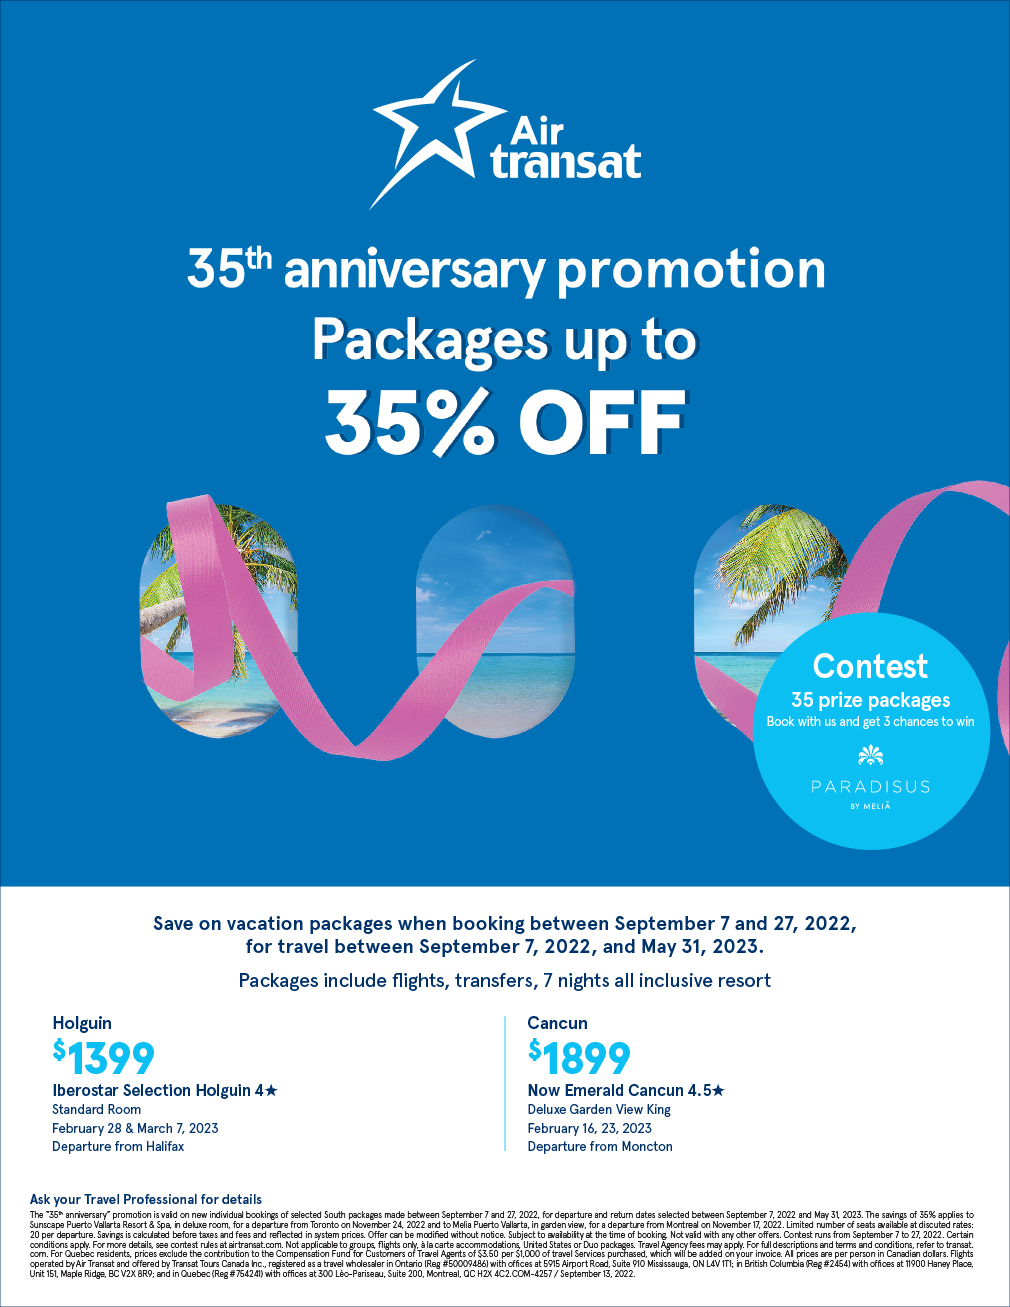 Packages Up To 35% Off - Halifax & Moncton Departures